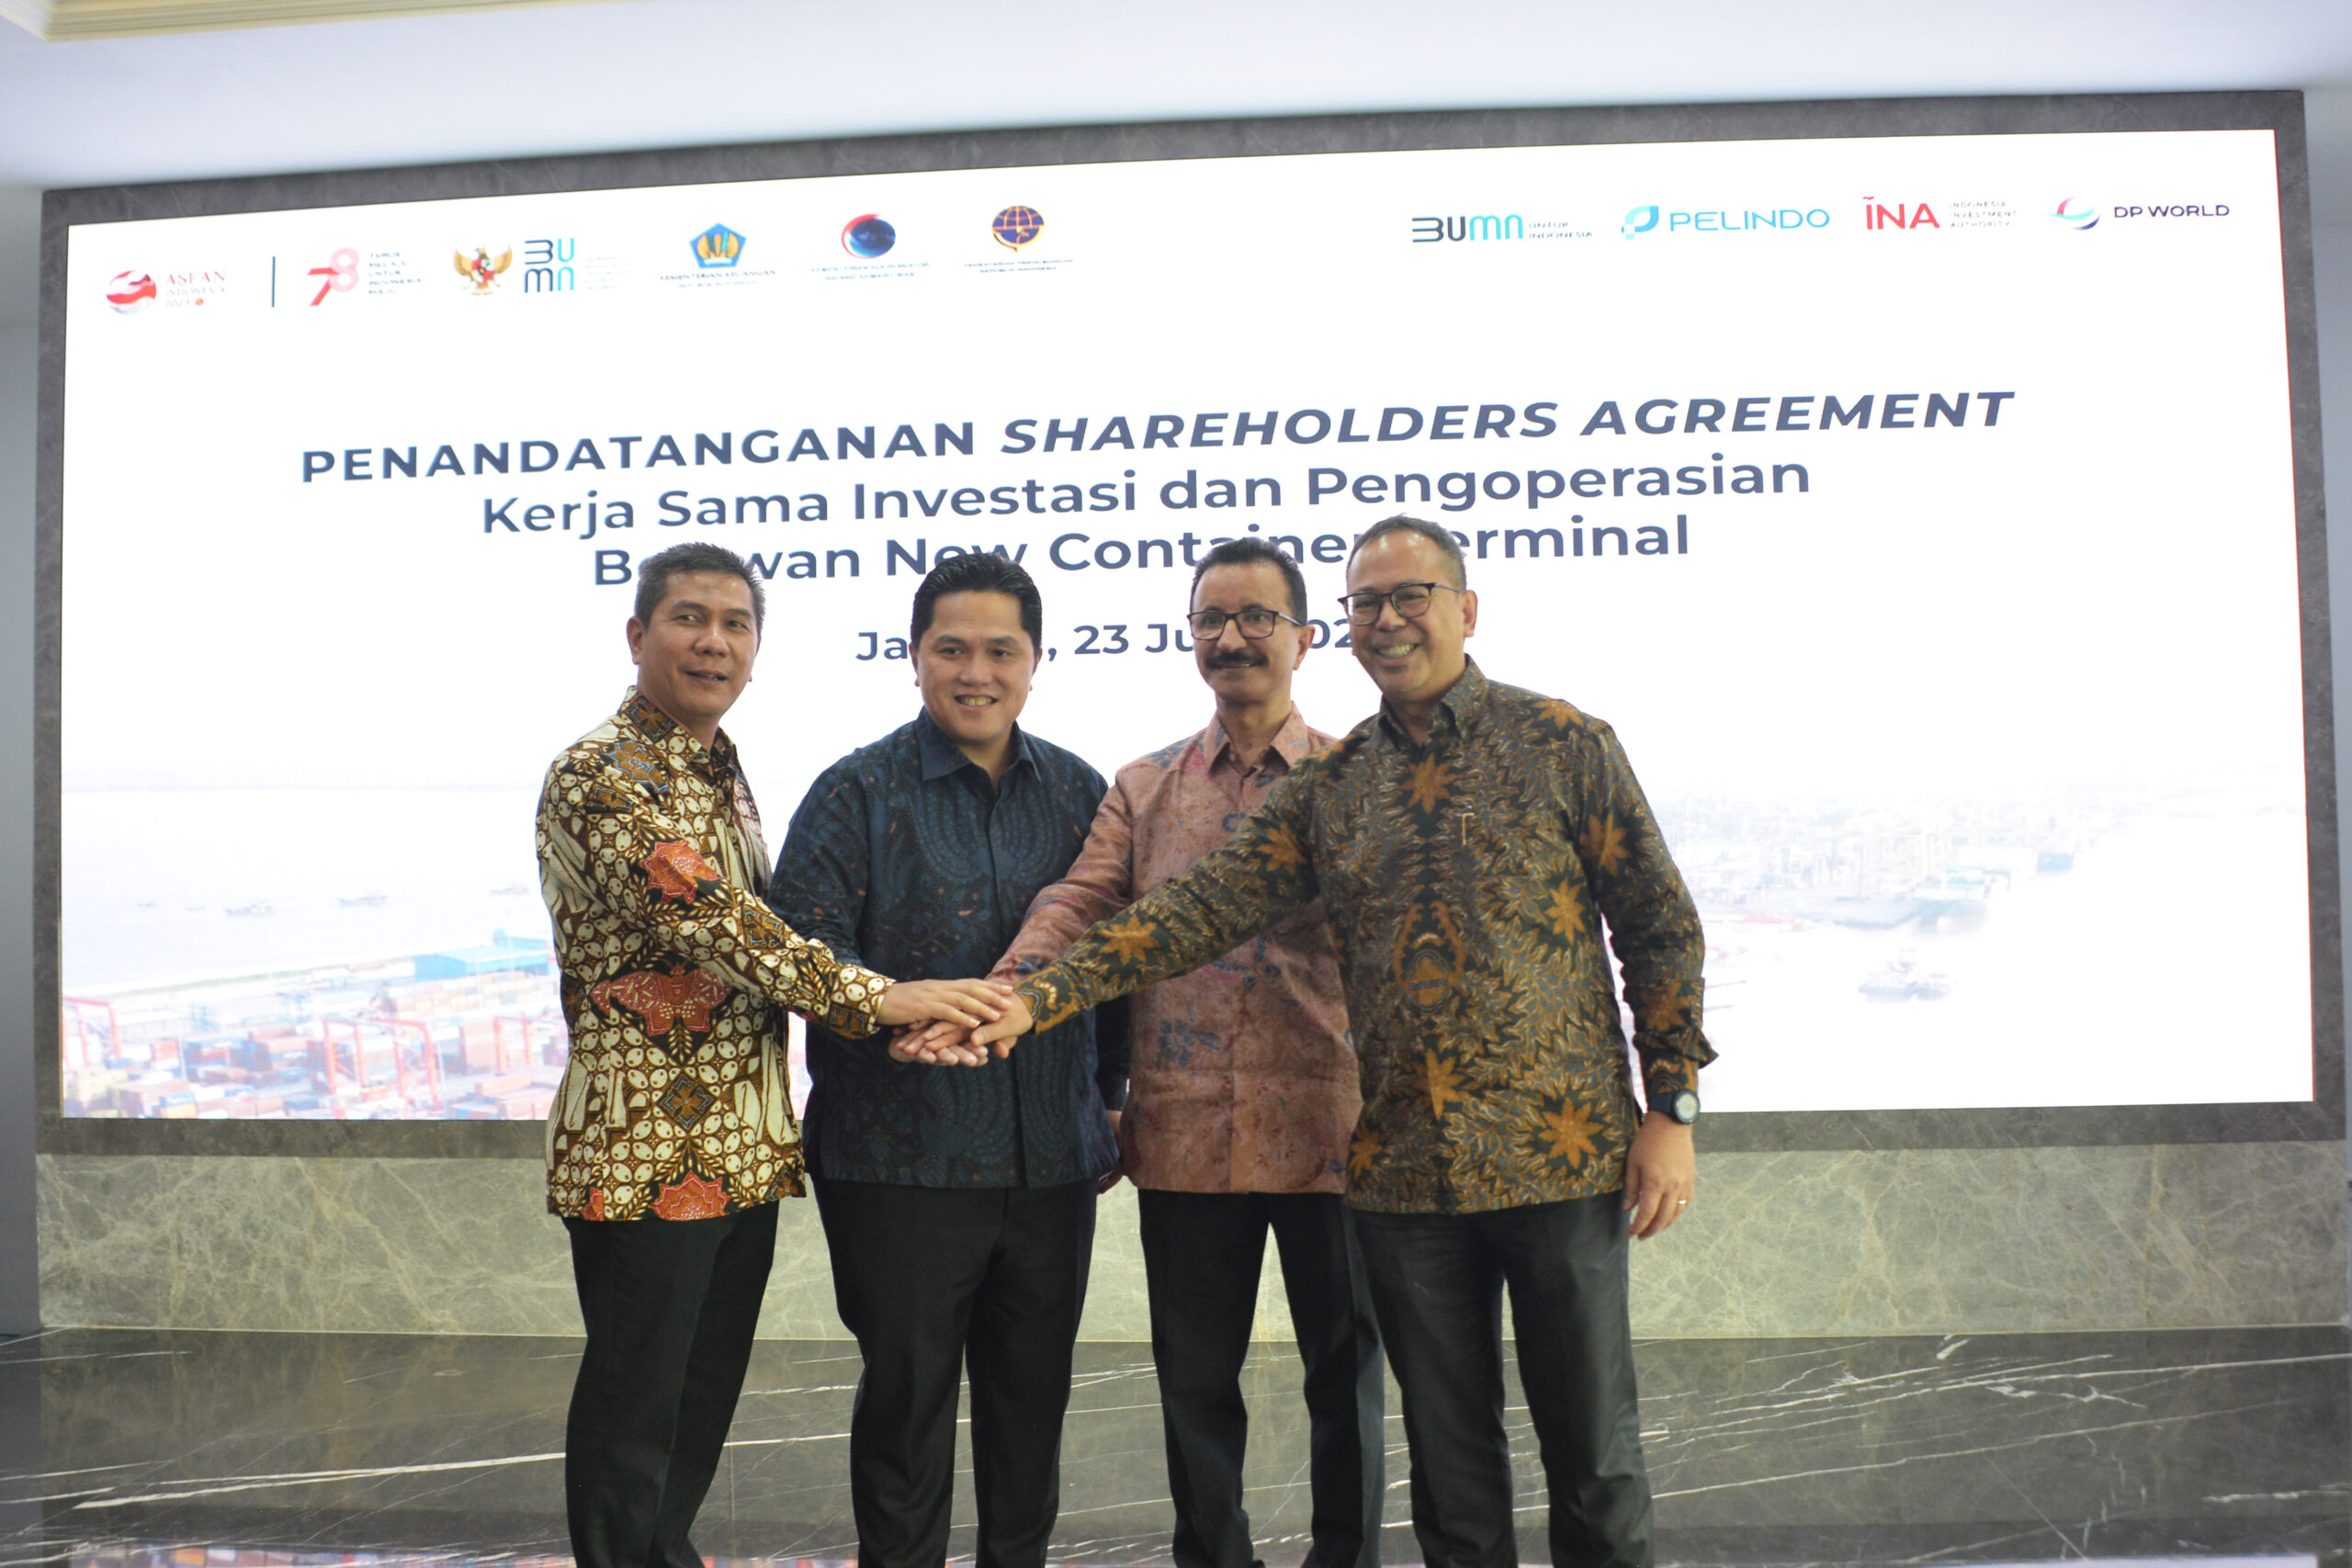 Belawan New Container Terminal agreement signed